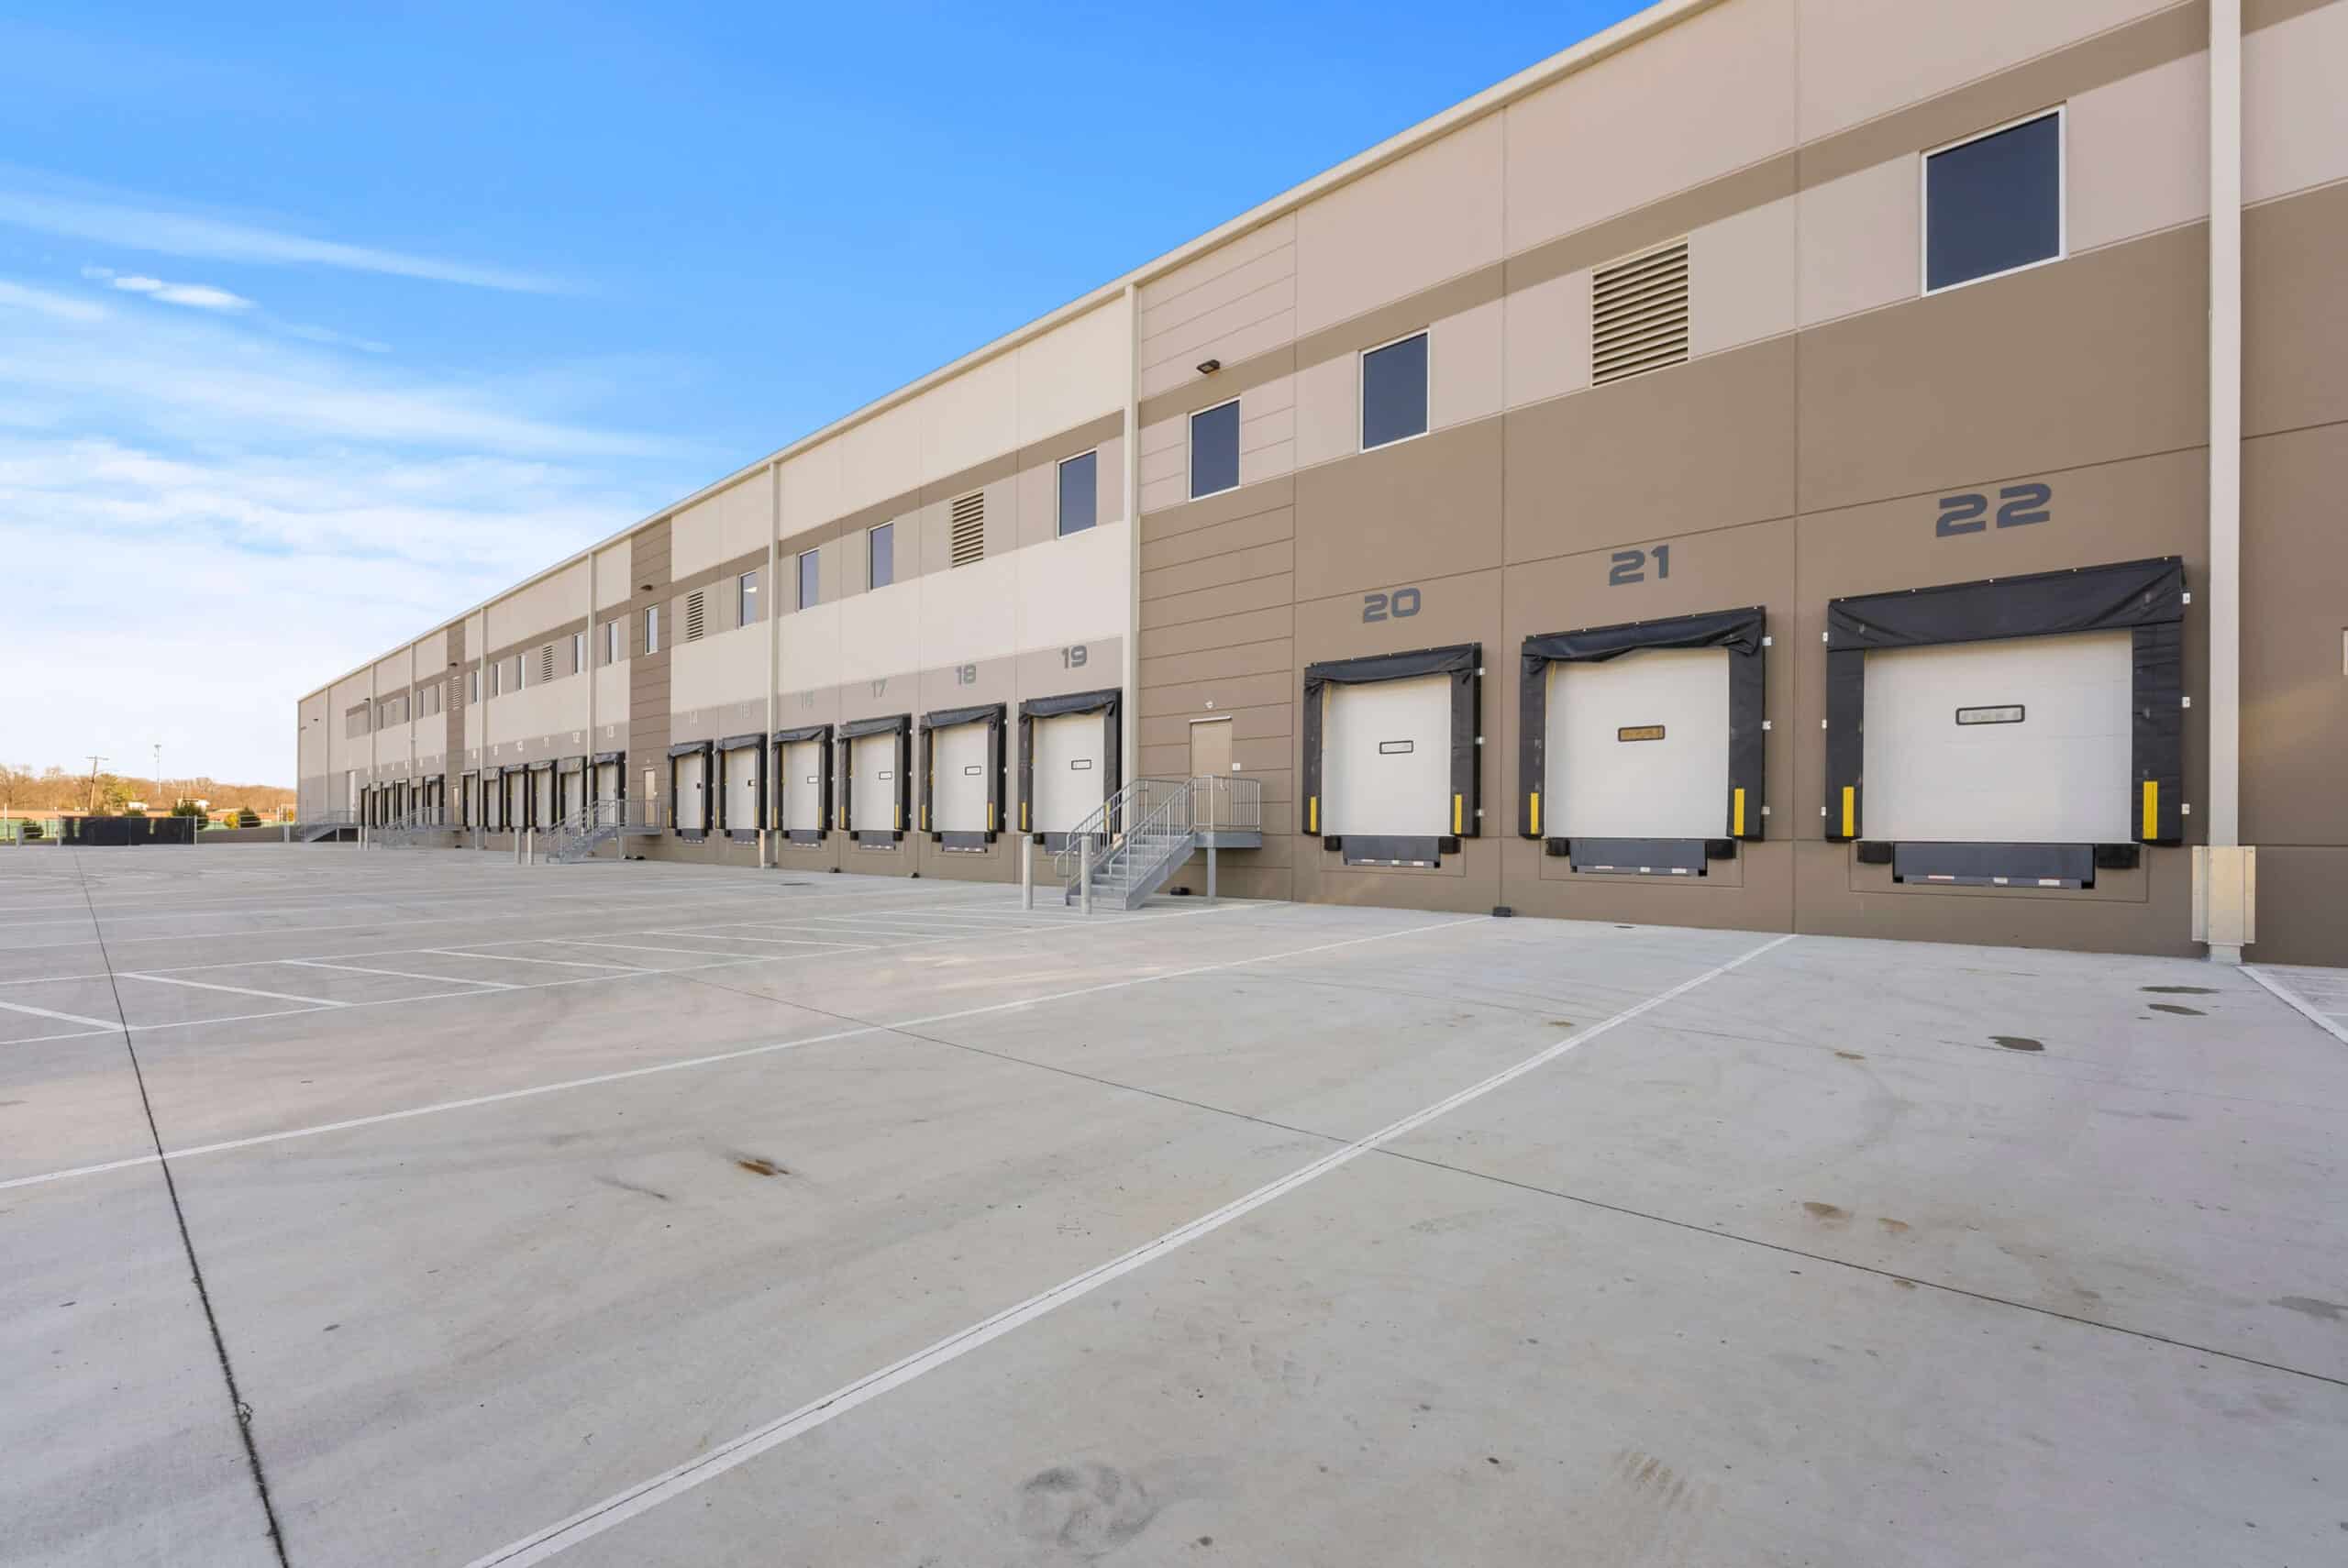 An warehouse with multiple large doors, providing ample space for storage and easy access.